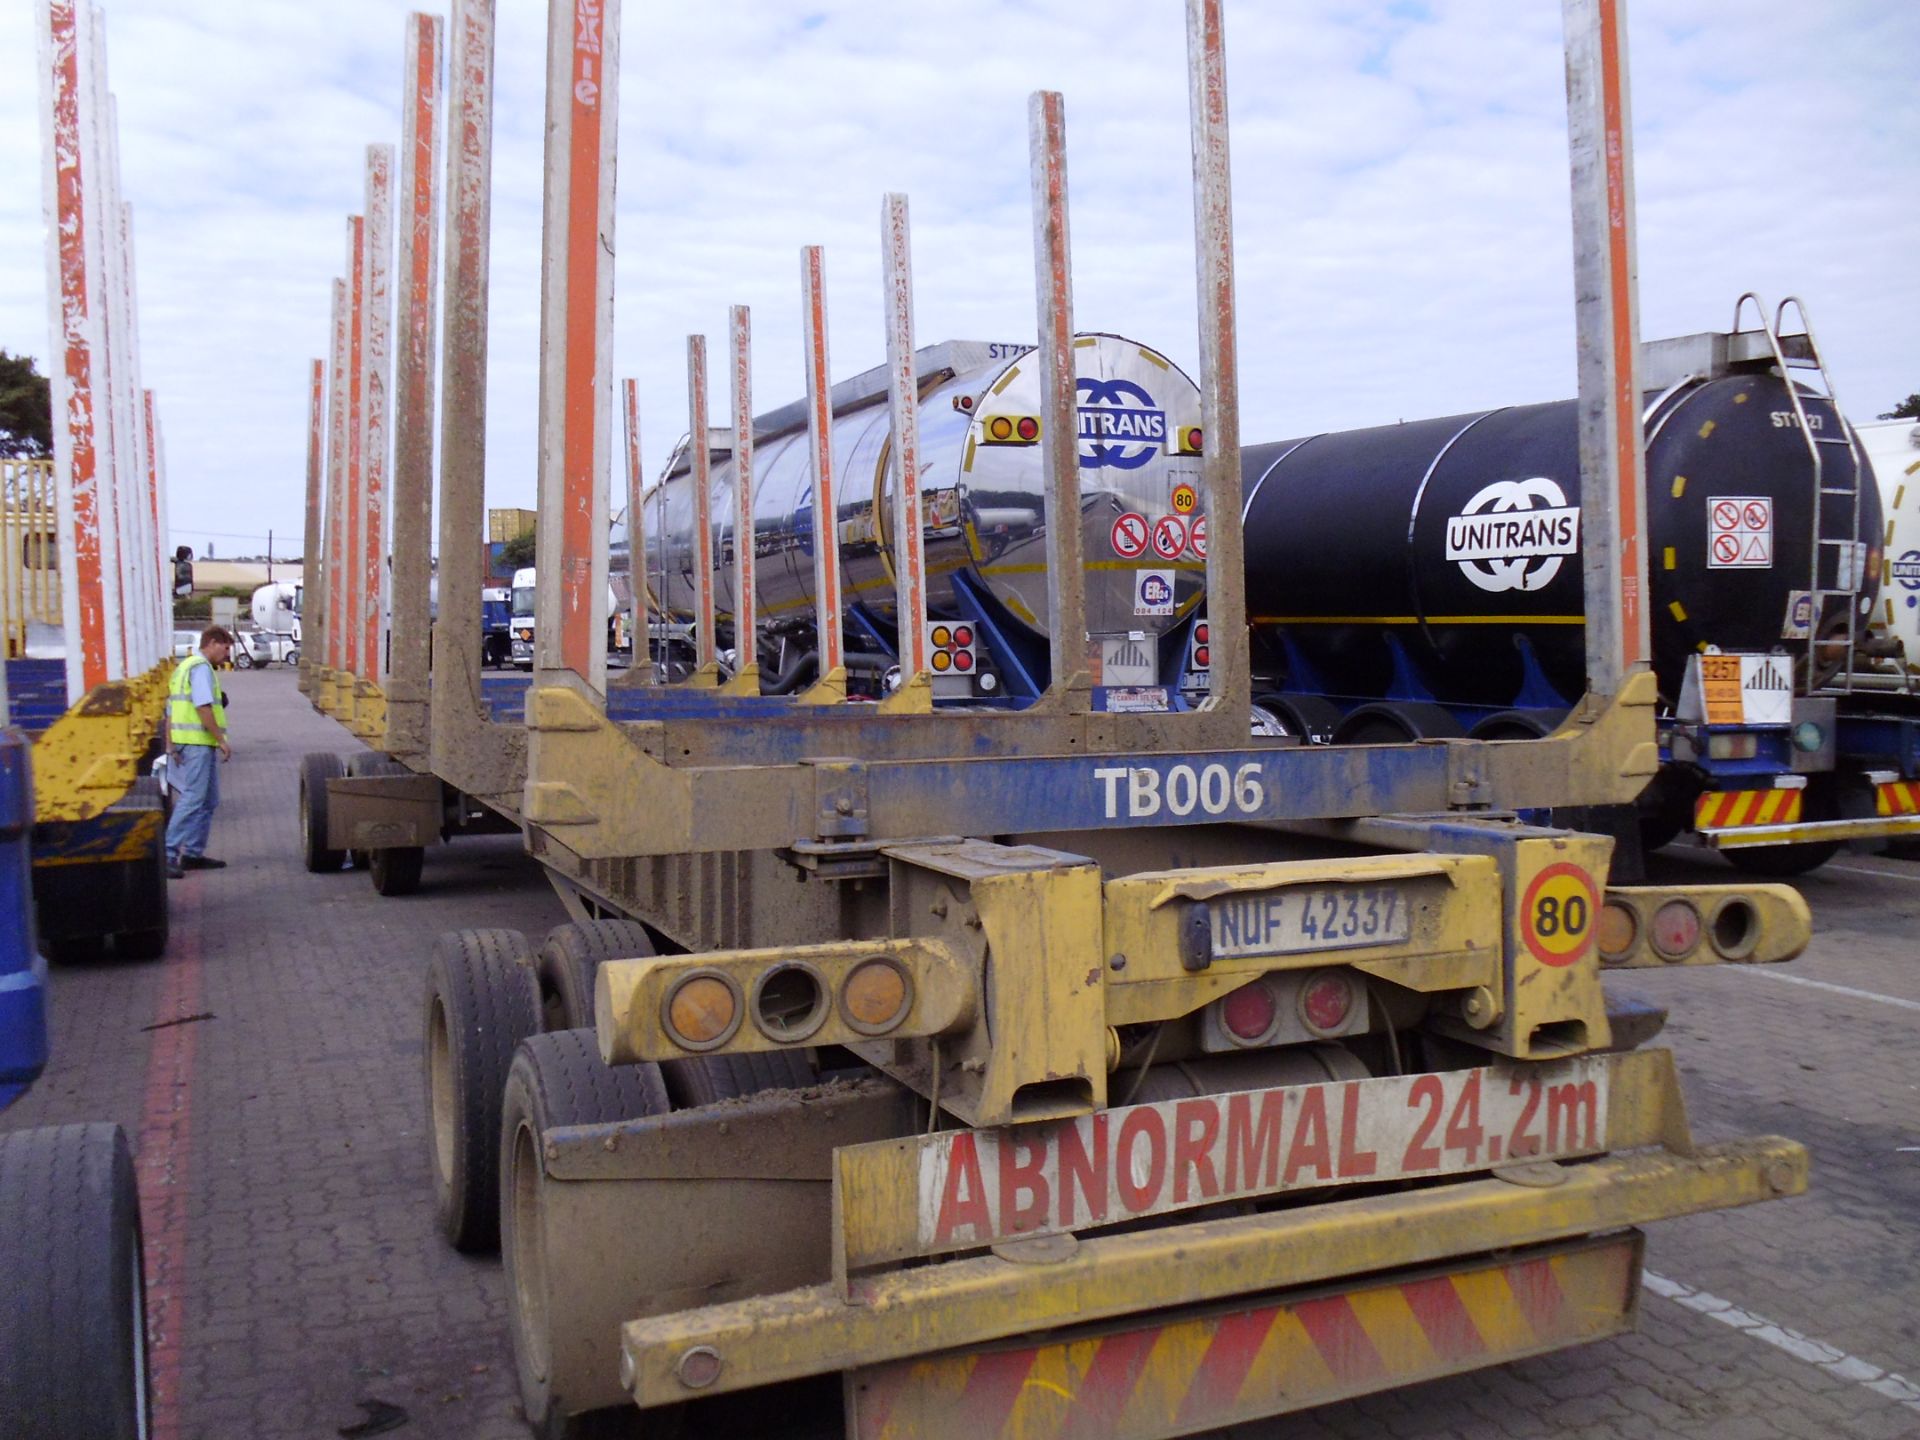 2011 TOHF 4 AXLE TIMBER D/BAR NUF42337 - (TDB006) - LOCATION KZN - Subject to Confirmation - Image 4 of 5